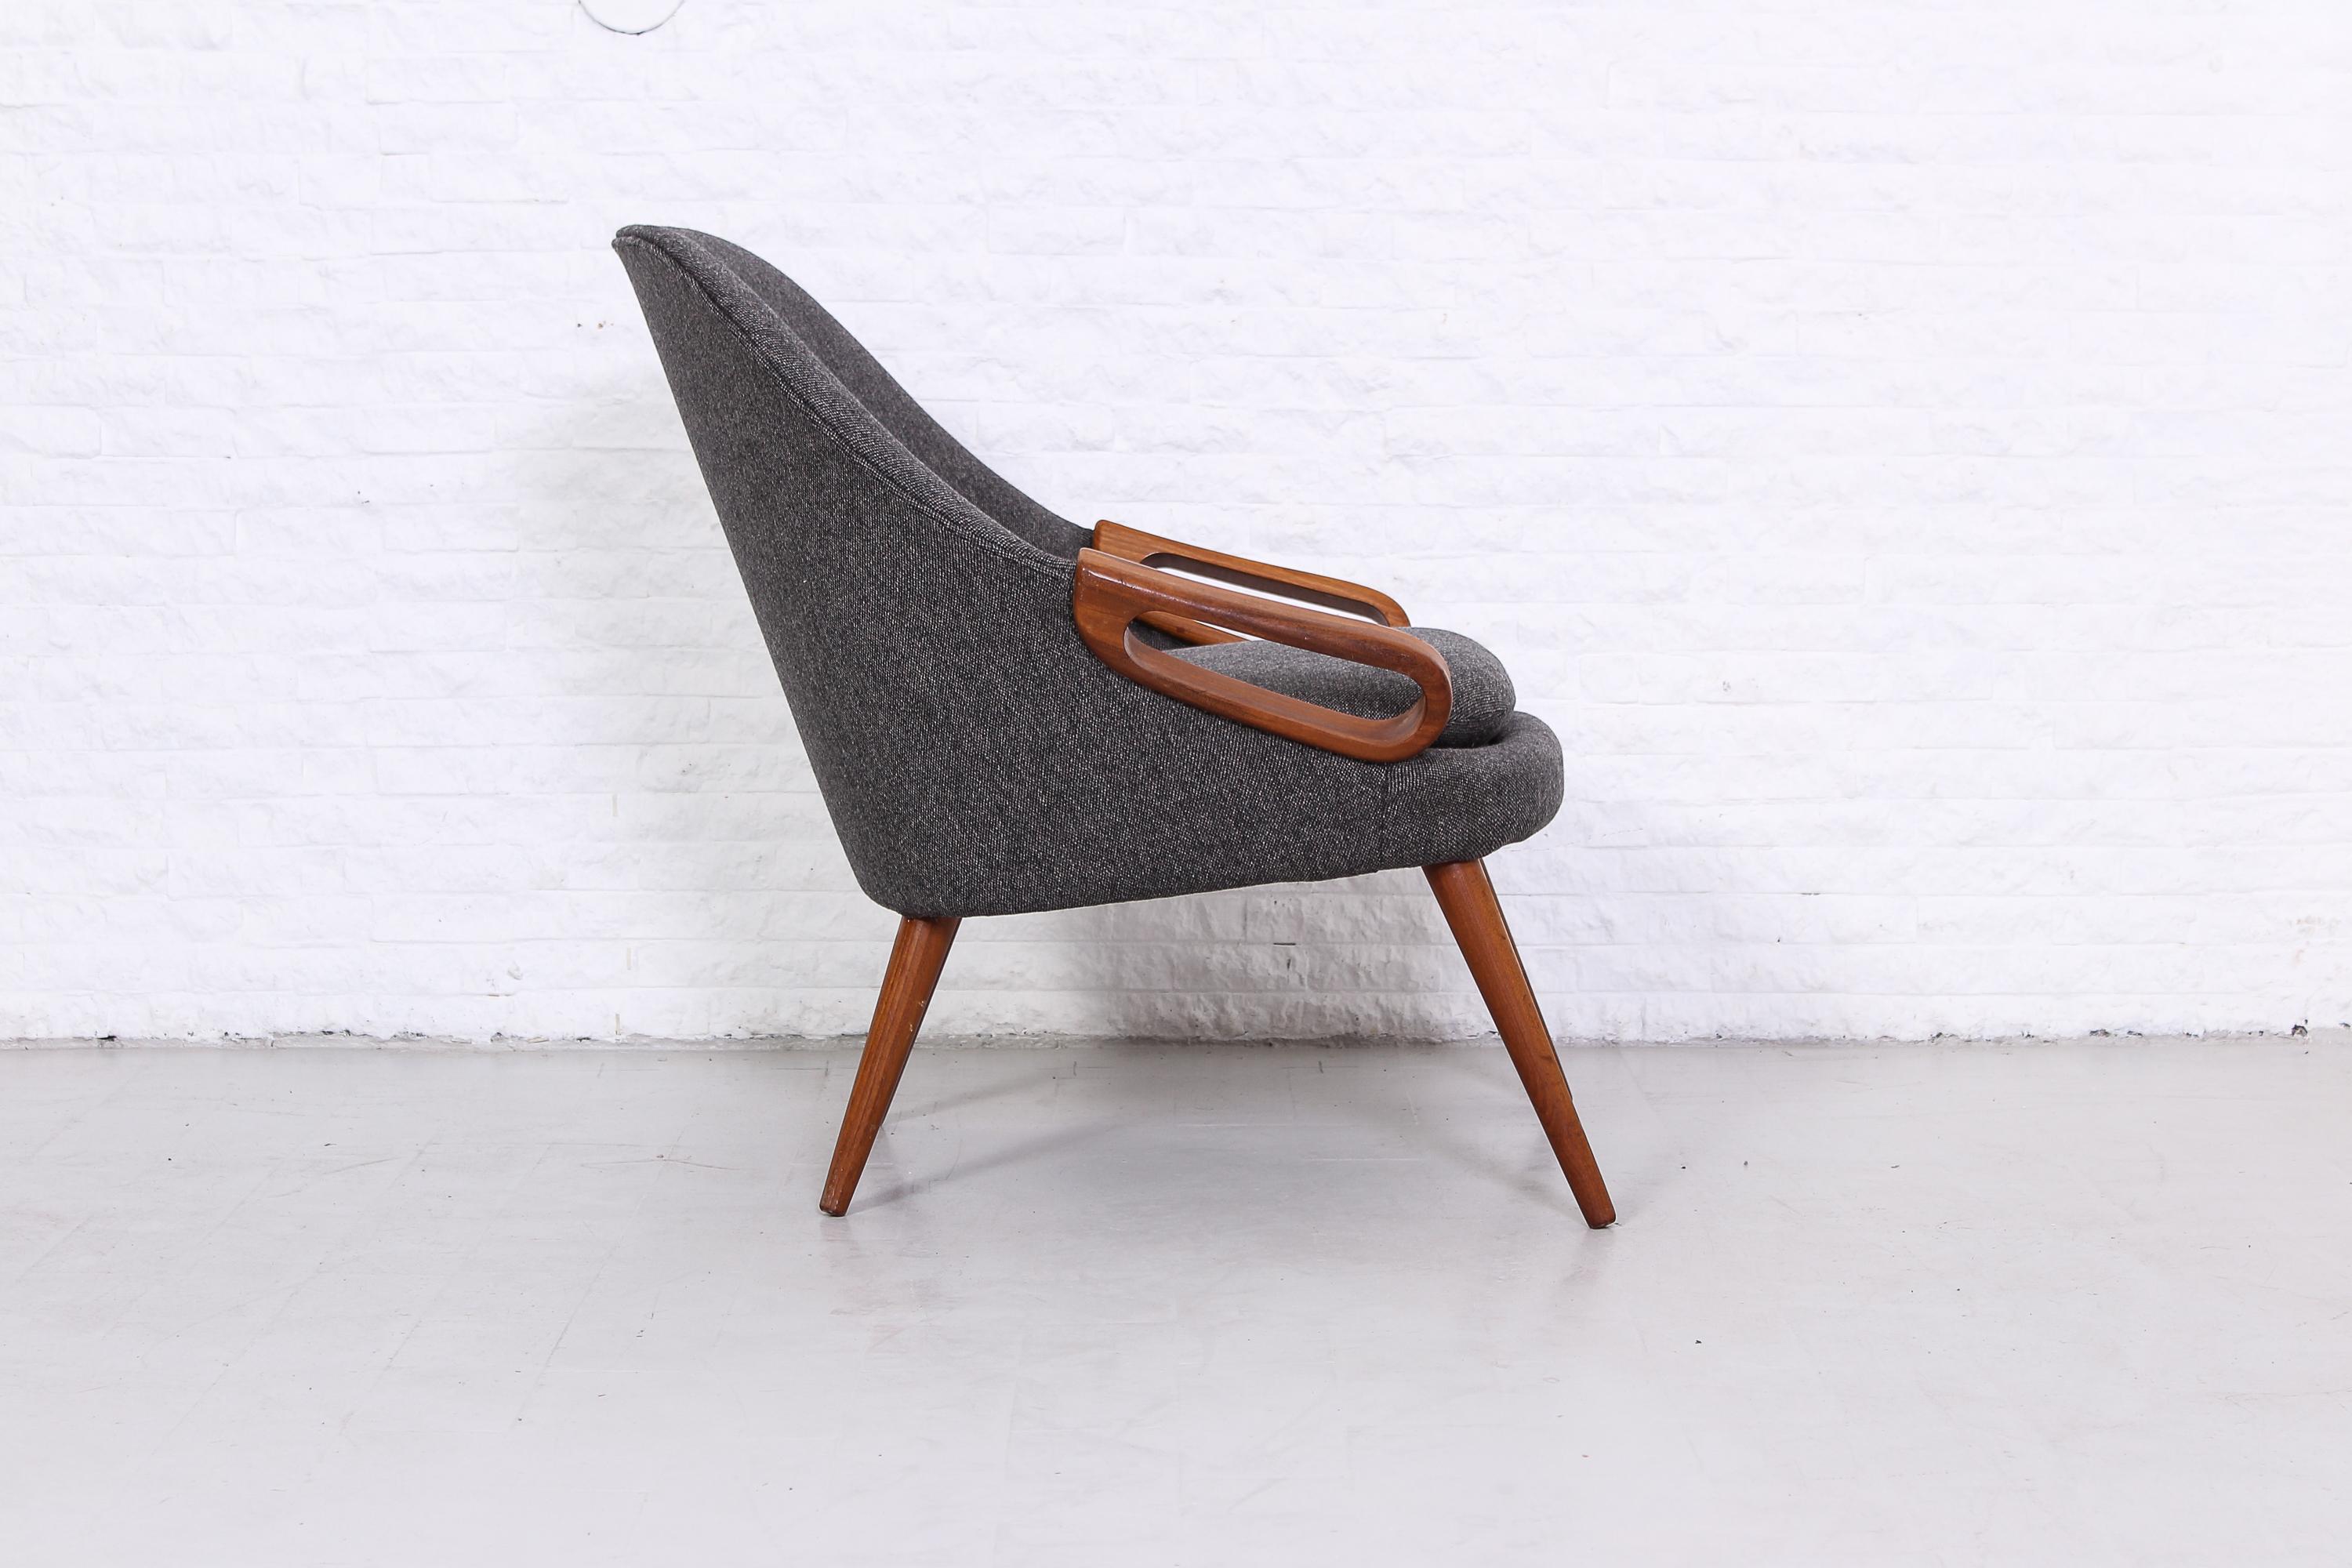 A beautiful Danish easy chair made in the 1950s. The legs and armrests are made out of teak and the chair has been reupholstered in a high quality Scandinavian wool fabric. Excellent condition.